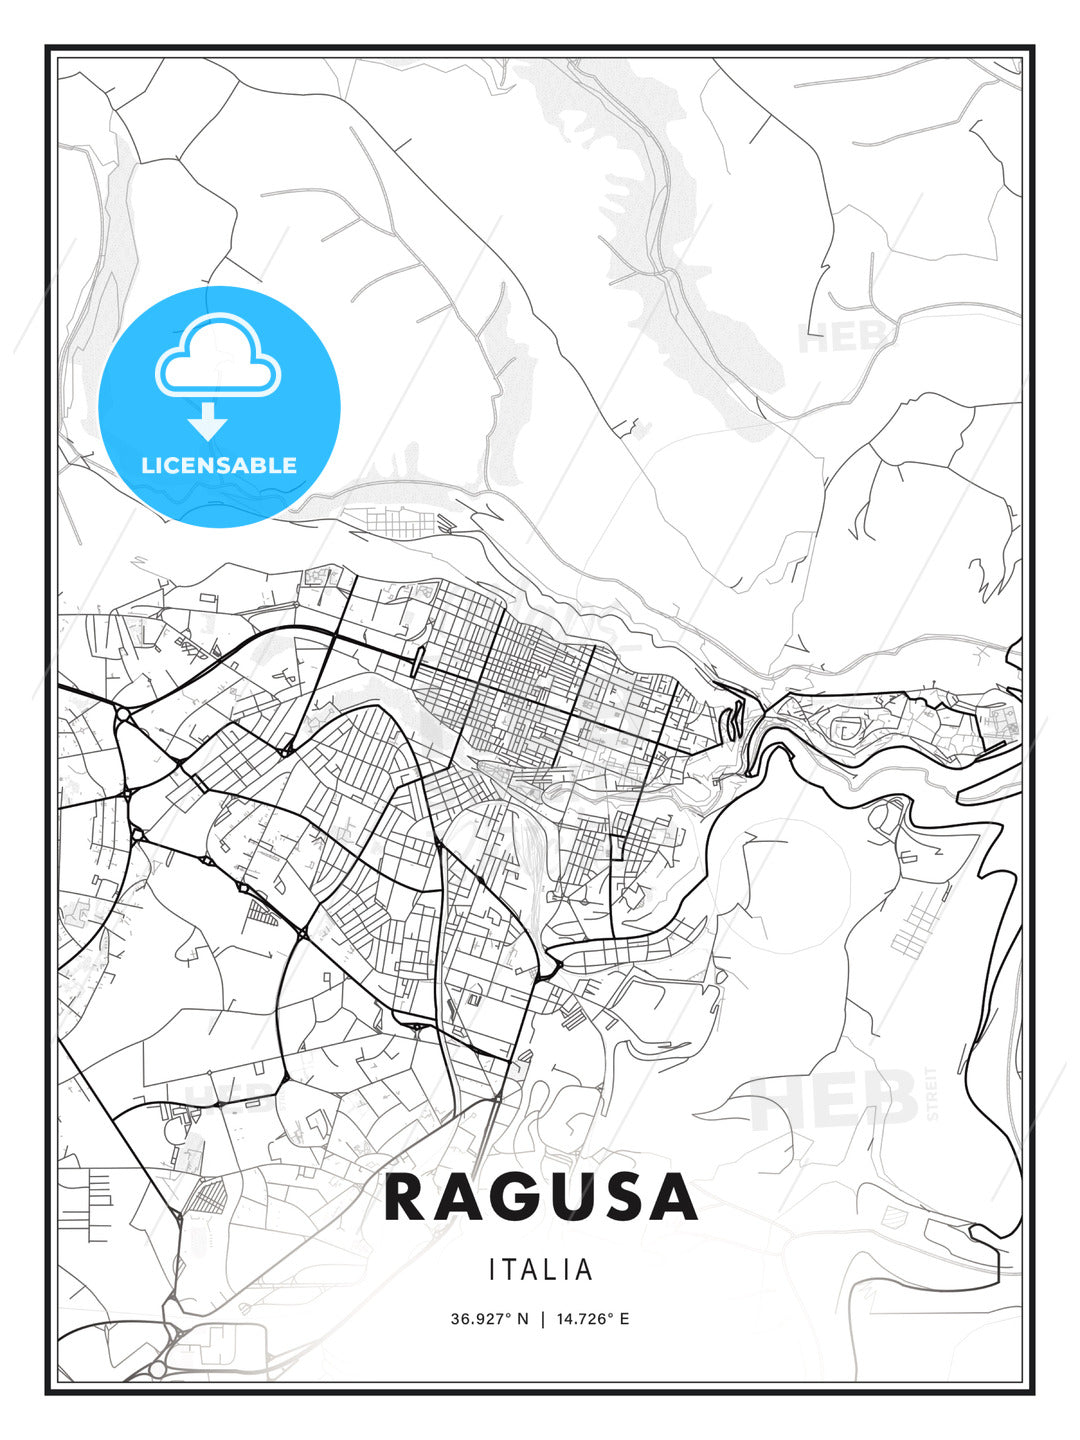 Ragusa, Italy, Modern Print Template in Various Formats - HEBSTREITS Sketches